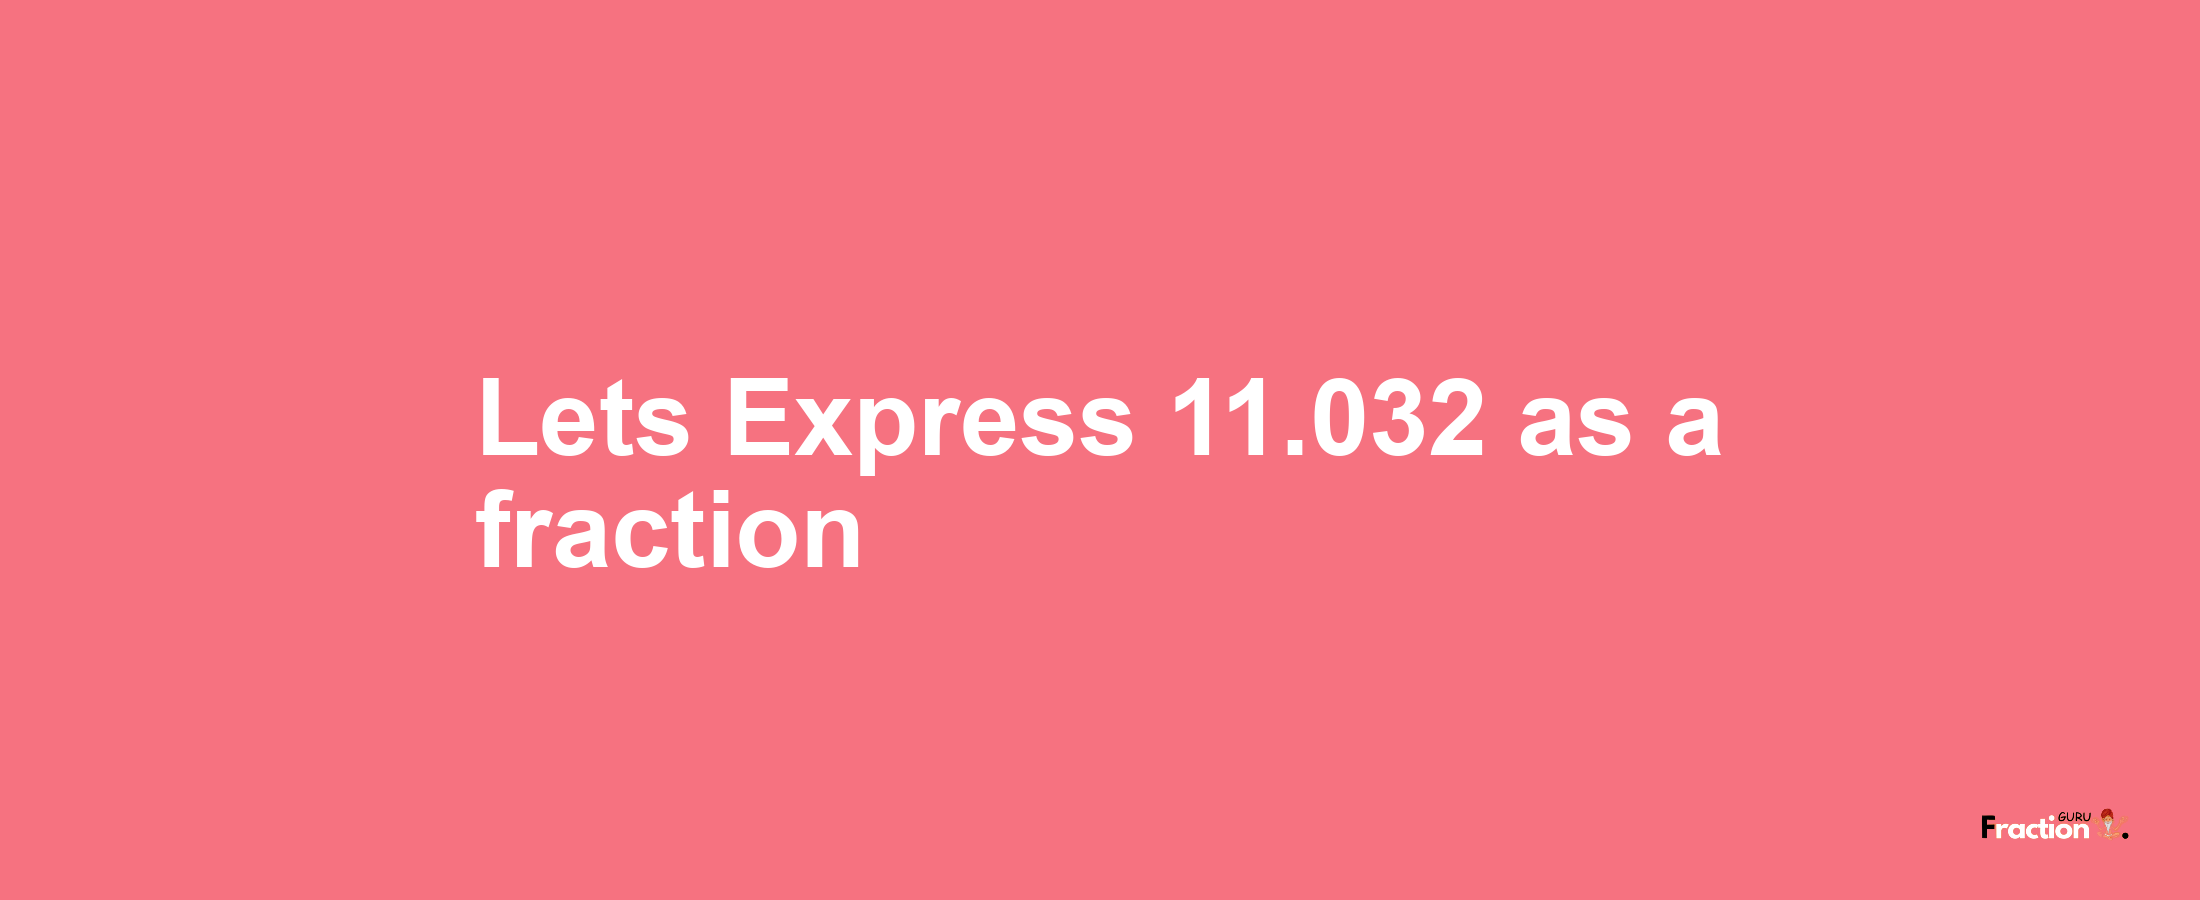 Lets Express 11.032 as afraction